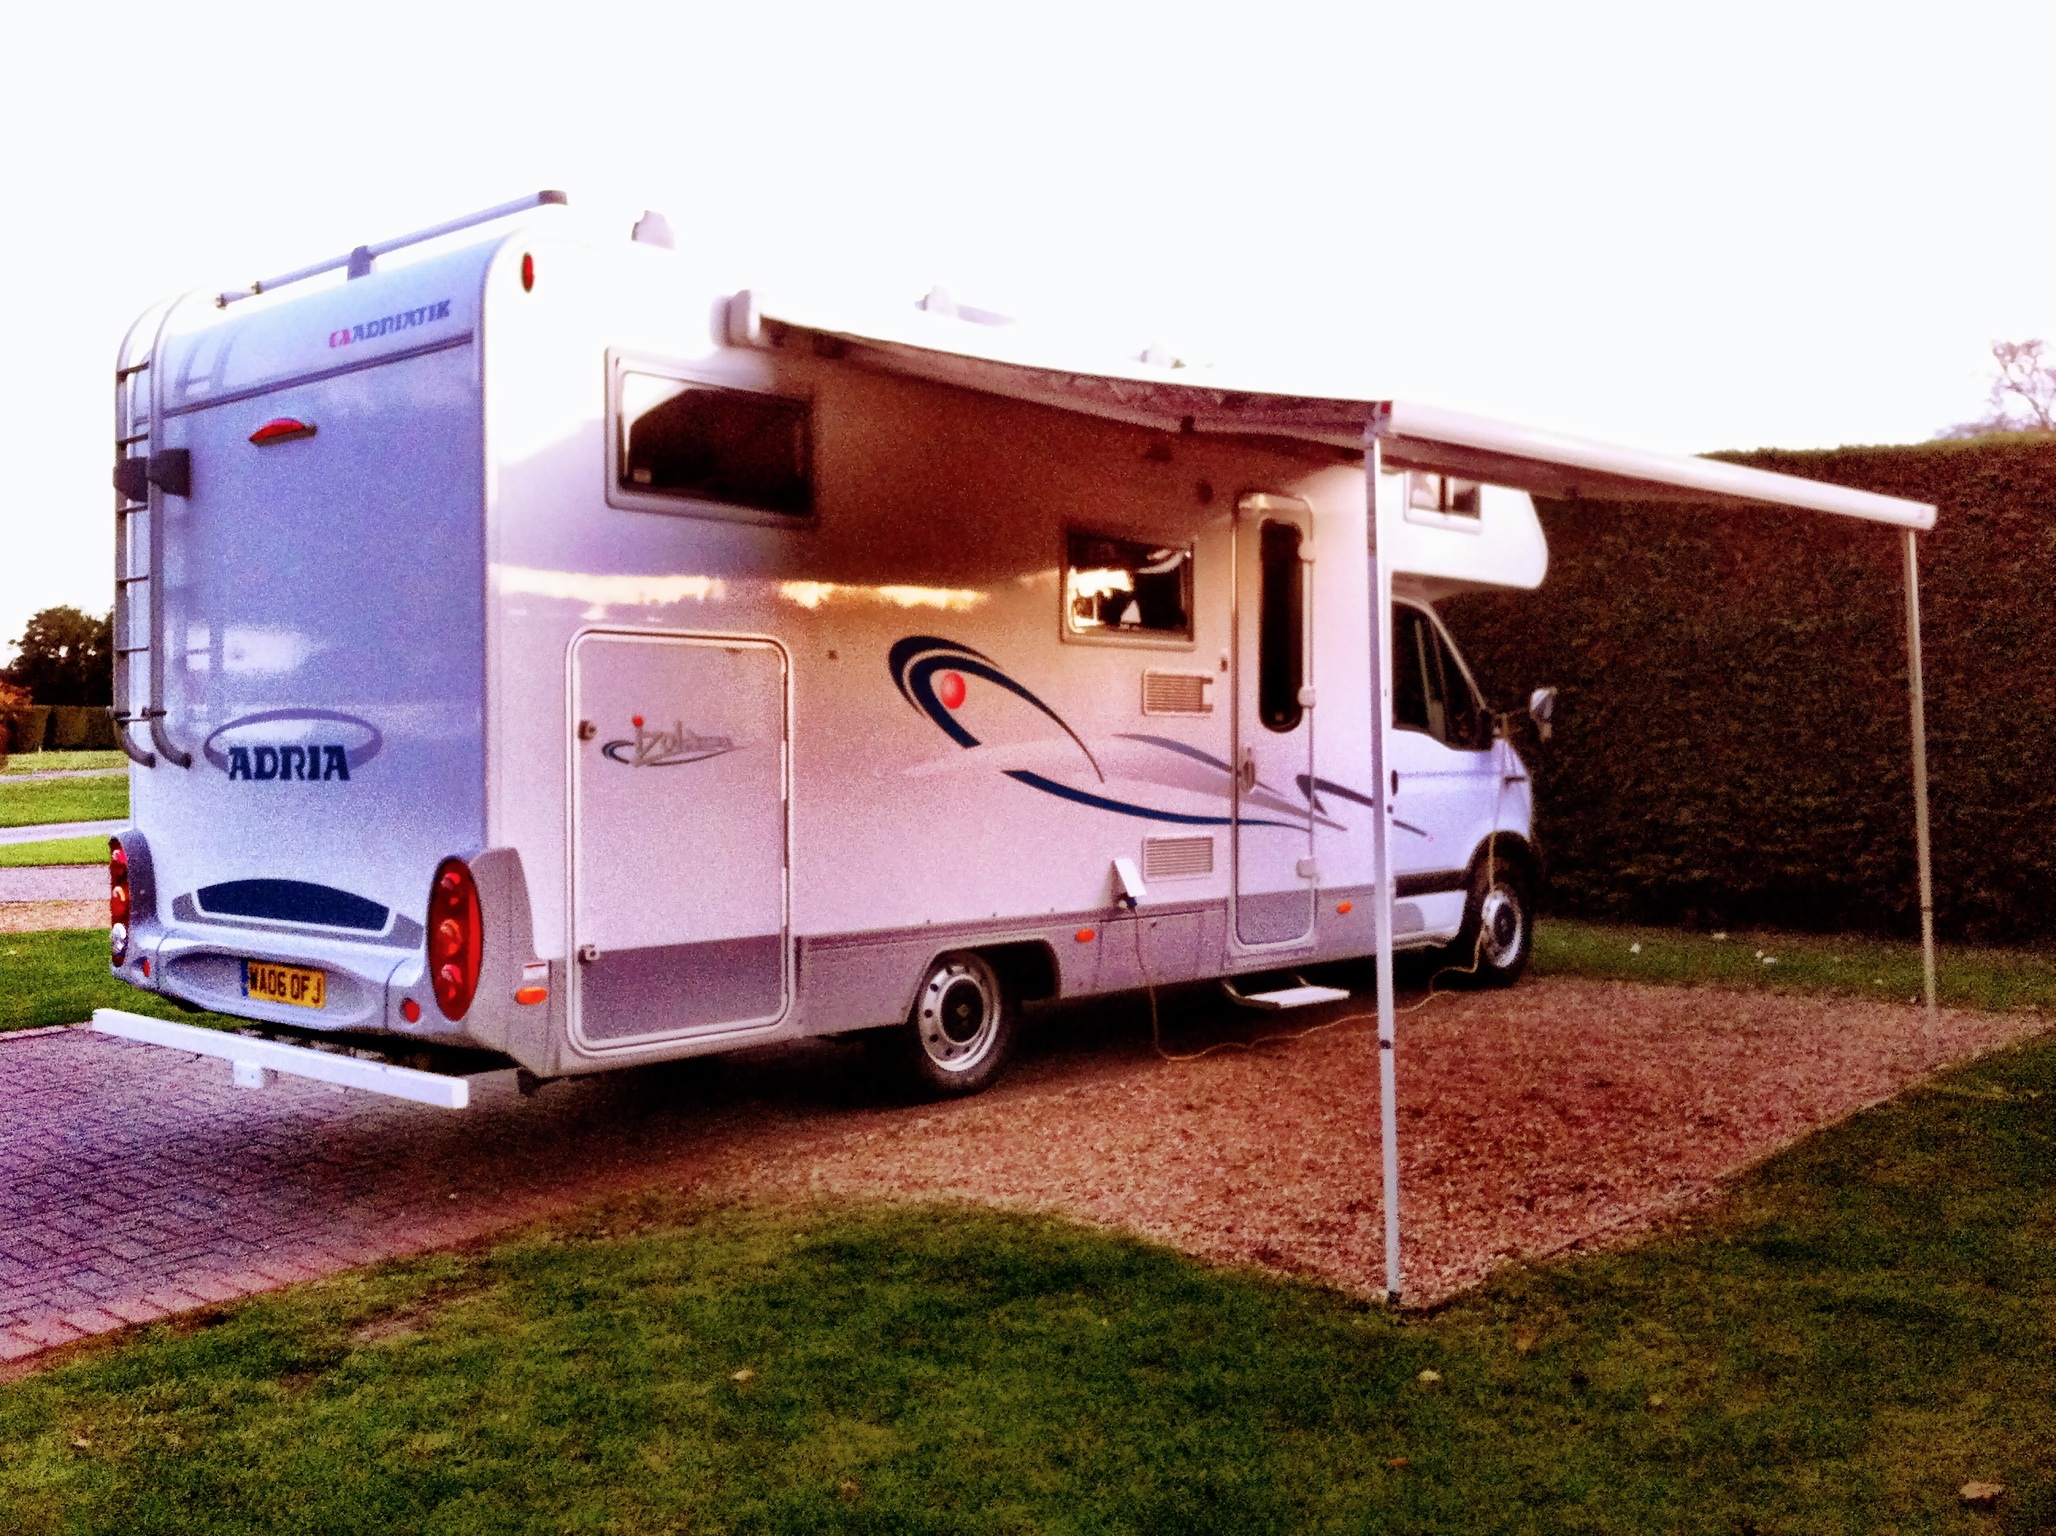 We Now Own a Motorhome!